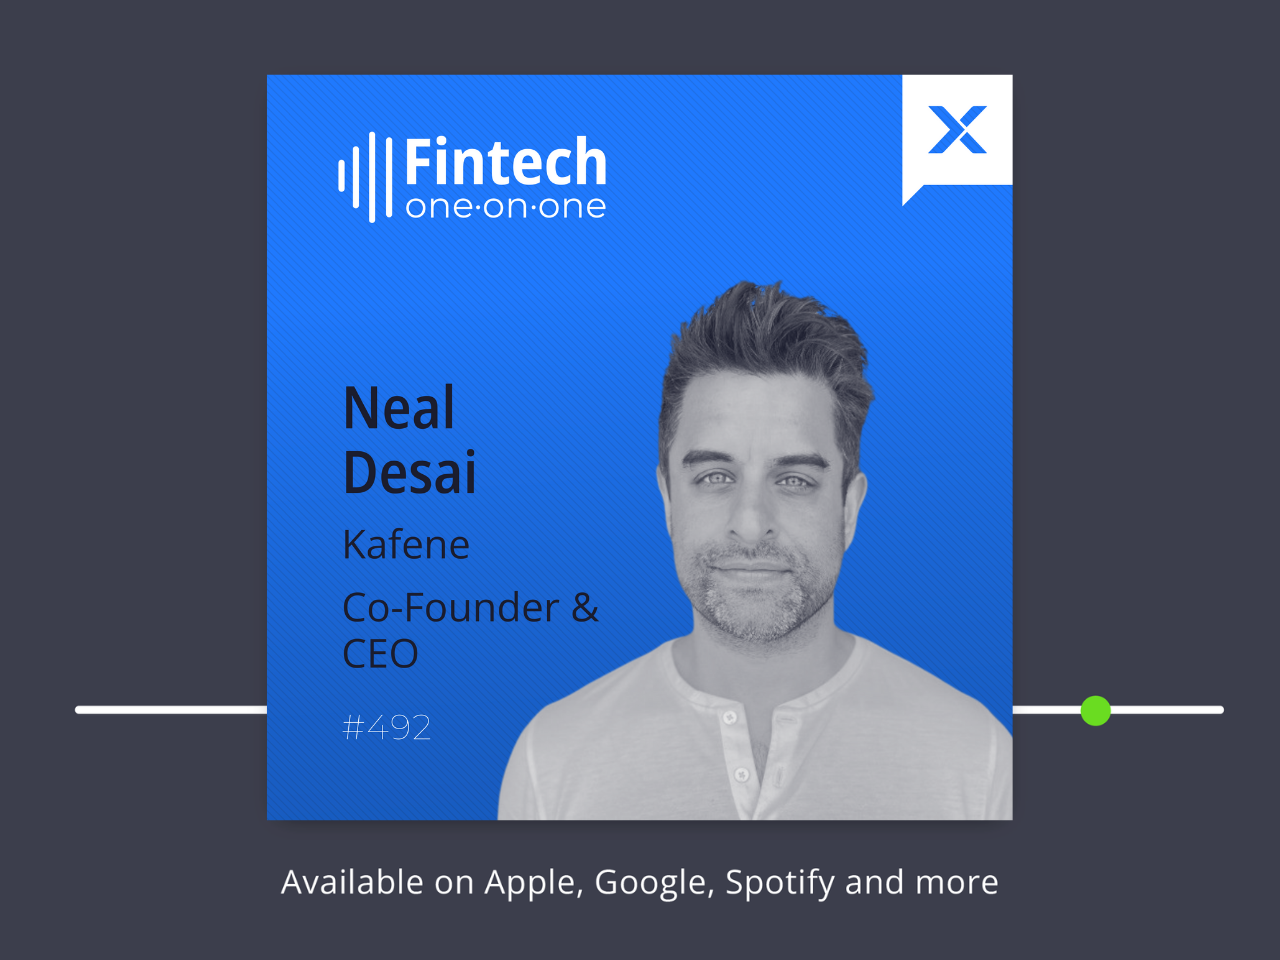 Neal Desai, Co-Founder and CEO of Kafene